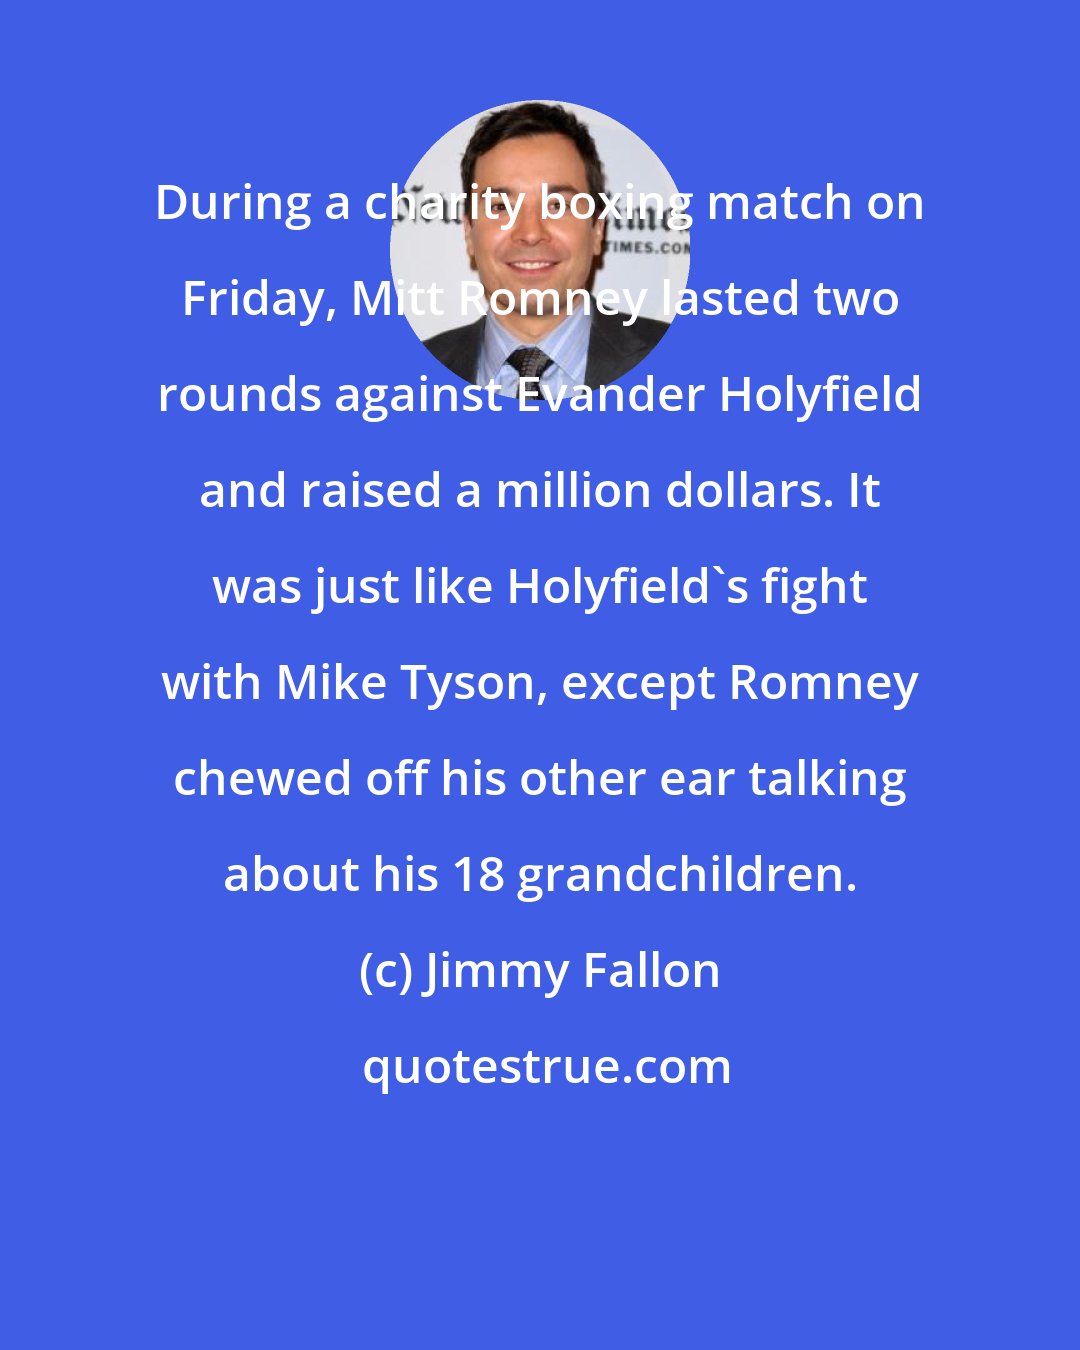 Jimmy Fallon: During a charity boxing match on Friday, Mitt Romney lasted two rounds against Evander Holyfield and raised a million dollars. It was just like Holyfield's fight with Mike Tyson, except Romney chewed off his other ear talking about his 18 grandchildren.